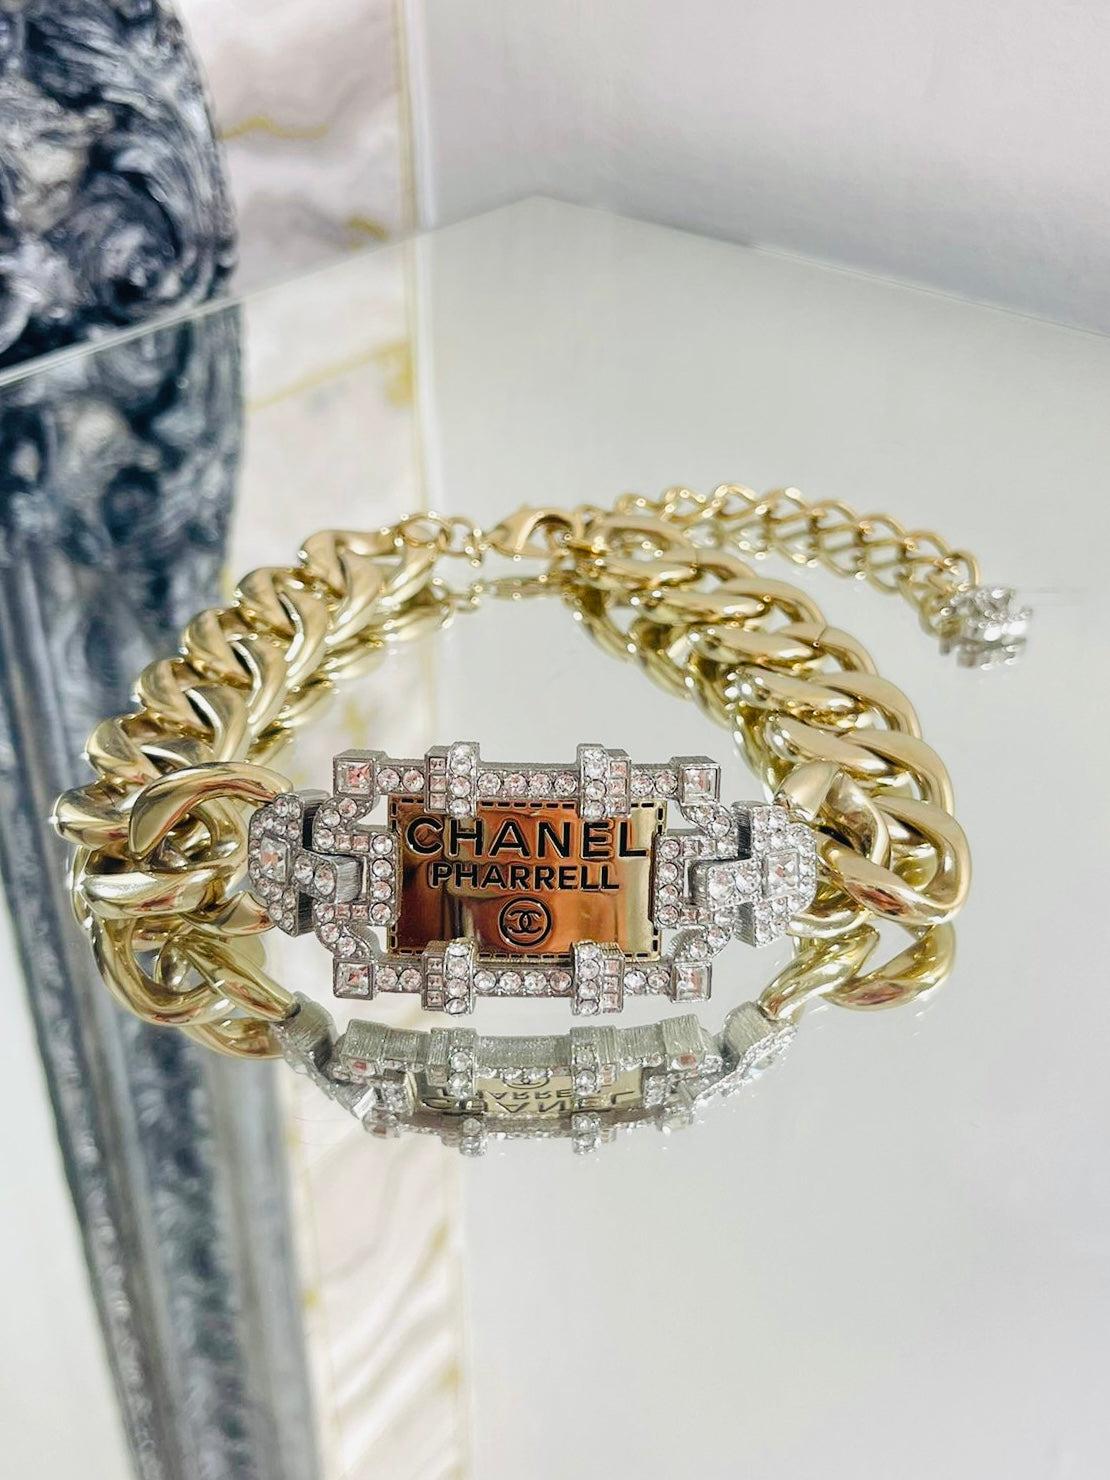 Chanel x Pharell Williams Chunky Chain & Crystal Choker Necklace

Rare oversized gold link necklace with an engraved plaque 

'Chanel, Pharell, CC' that is surrounded by crystals. Long dangle

lobster closure with a 'CC' logo in crystals. From 2019